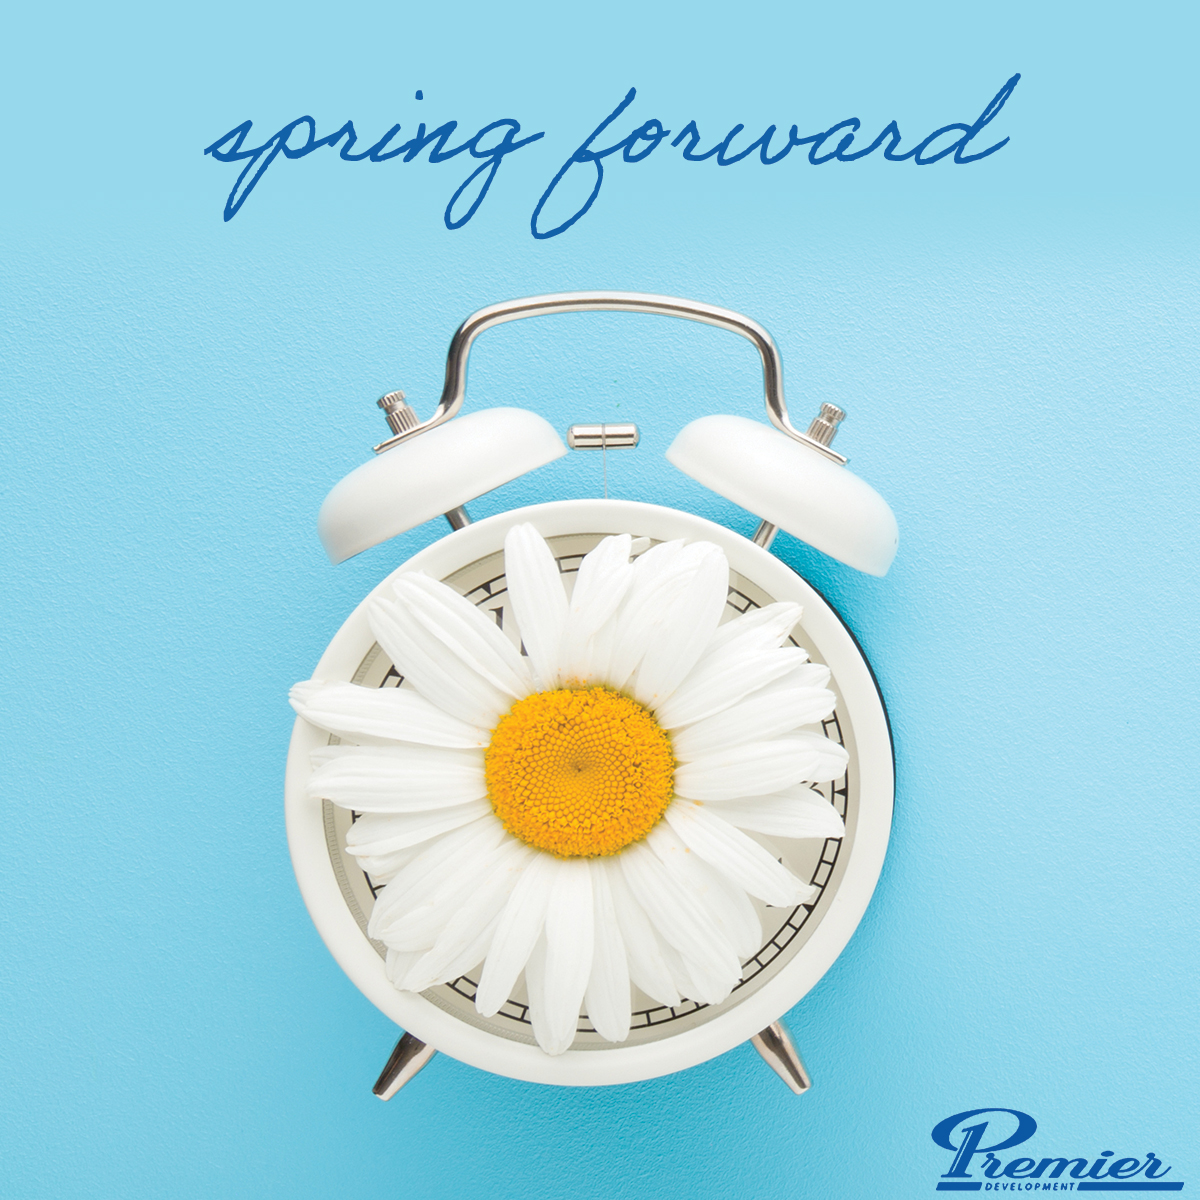 Don’t forget to spring 😉 your clocks forward an hour for daylight savings time!  
.
#daylightsavings #premierdevelopment #premierhomes